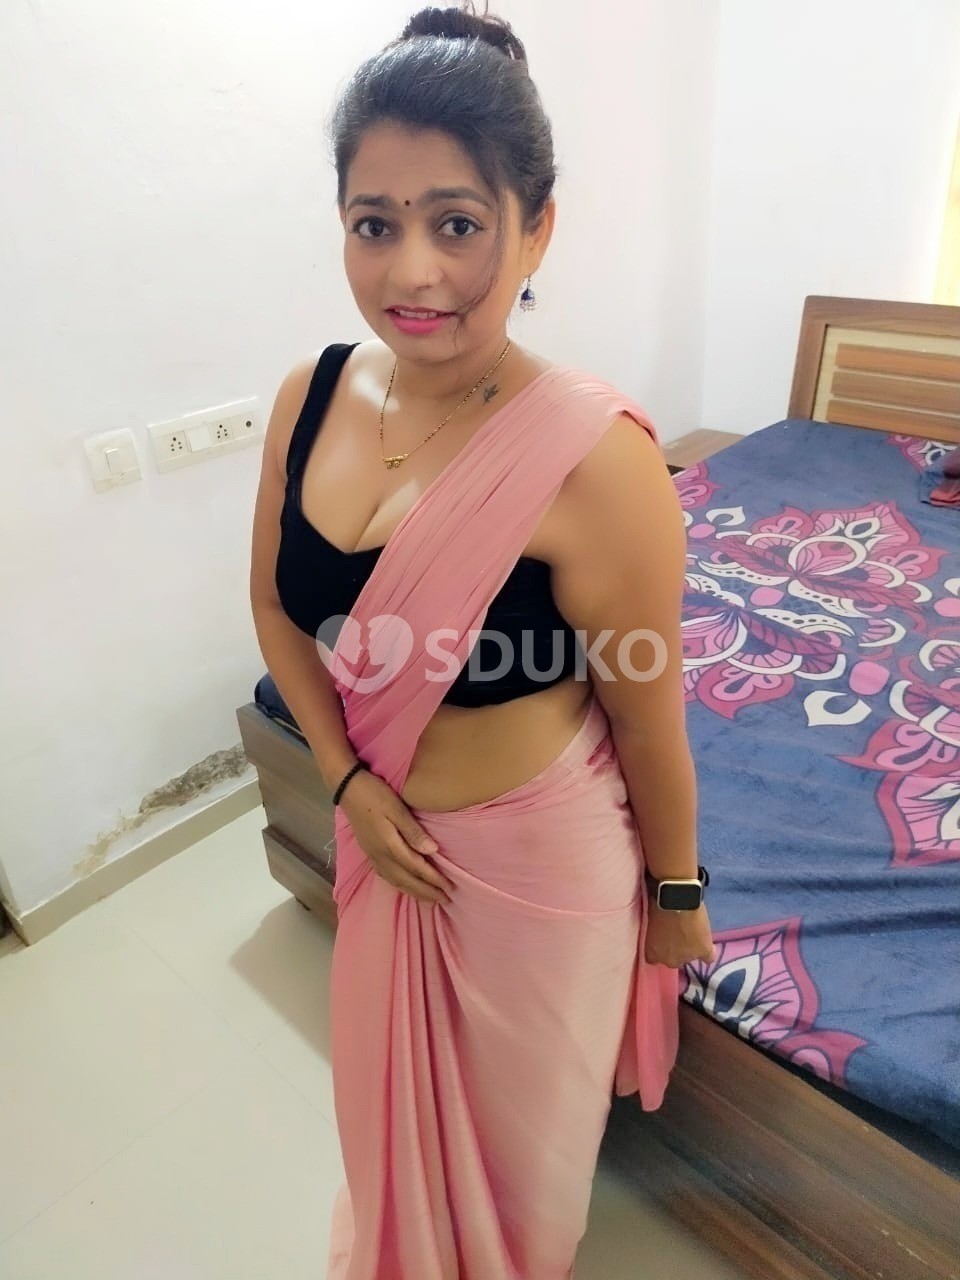 gandhinagar High profile college girls available full enjoy full satisfied girl available safe and secure llll